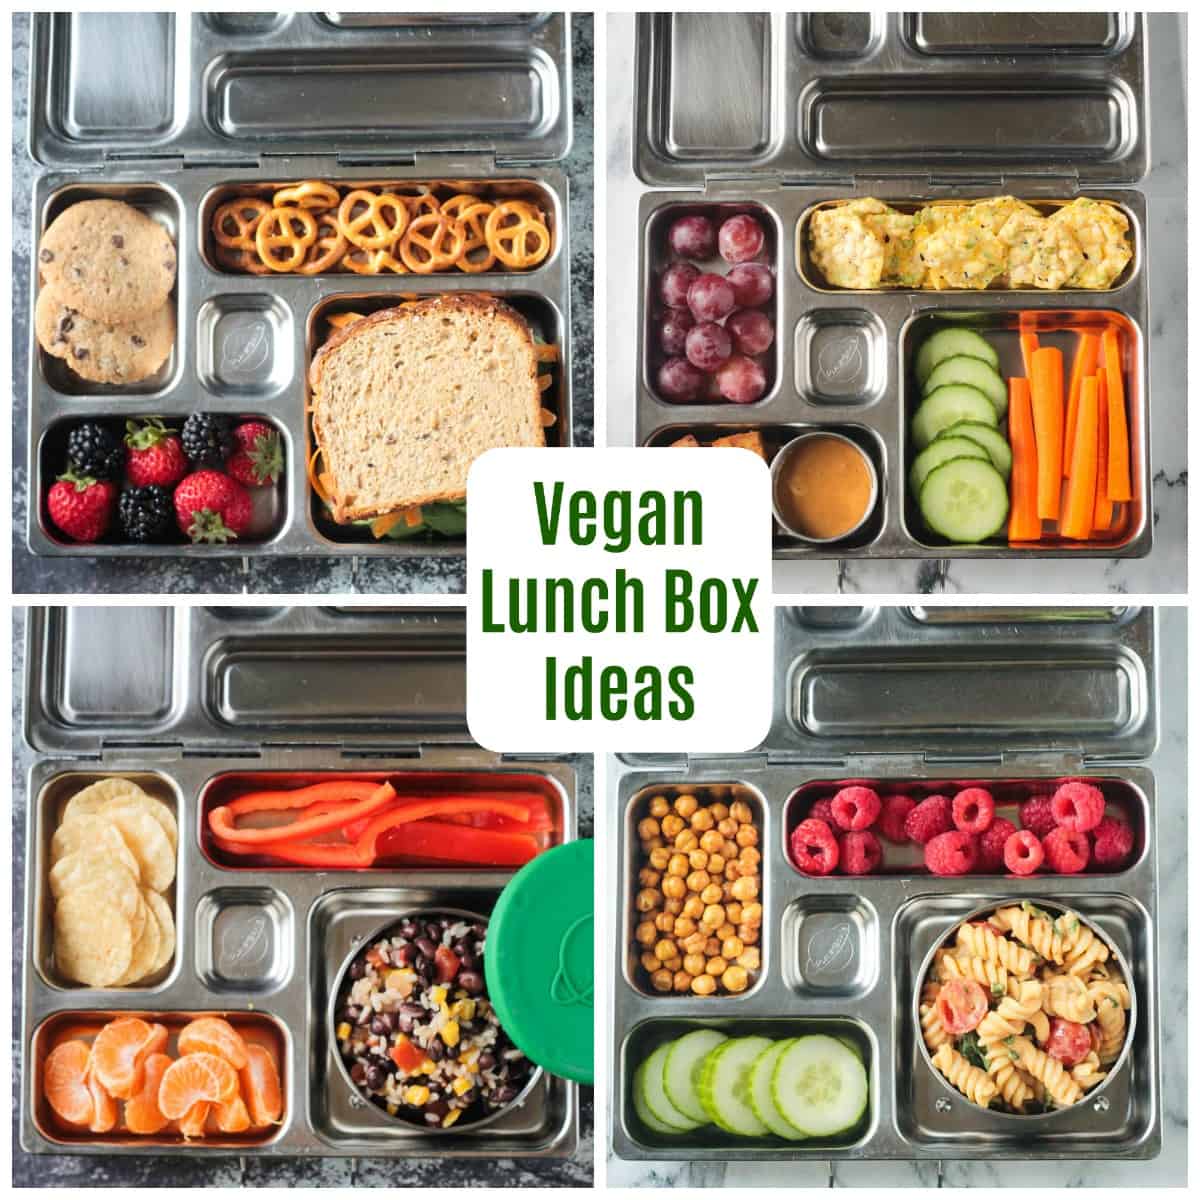 4-photo collage of lunch box meals in bento style metal lunchboxes.